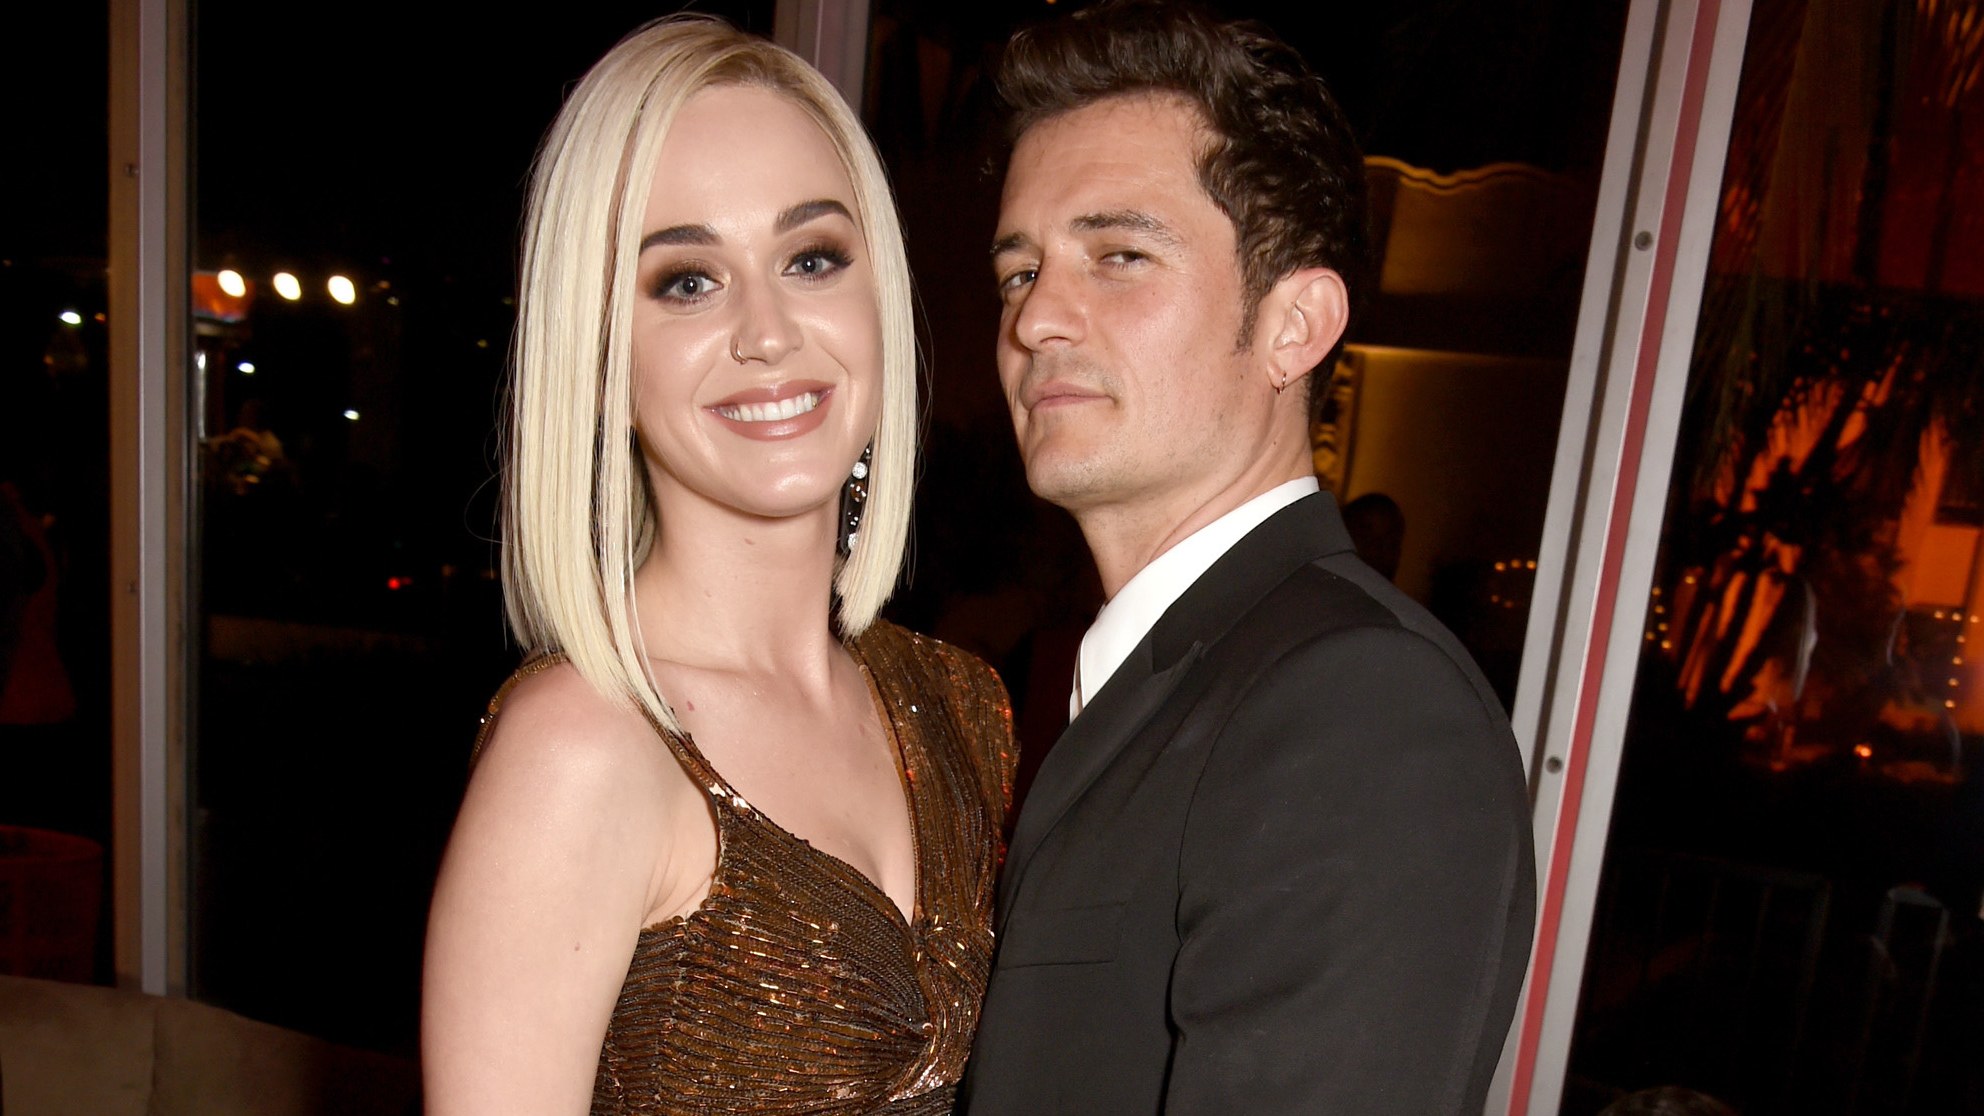 American Singer, Katy Perry Expecting First Child With Fiancee, Orlando